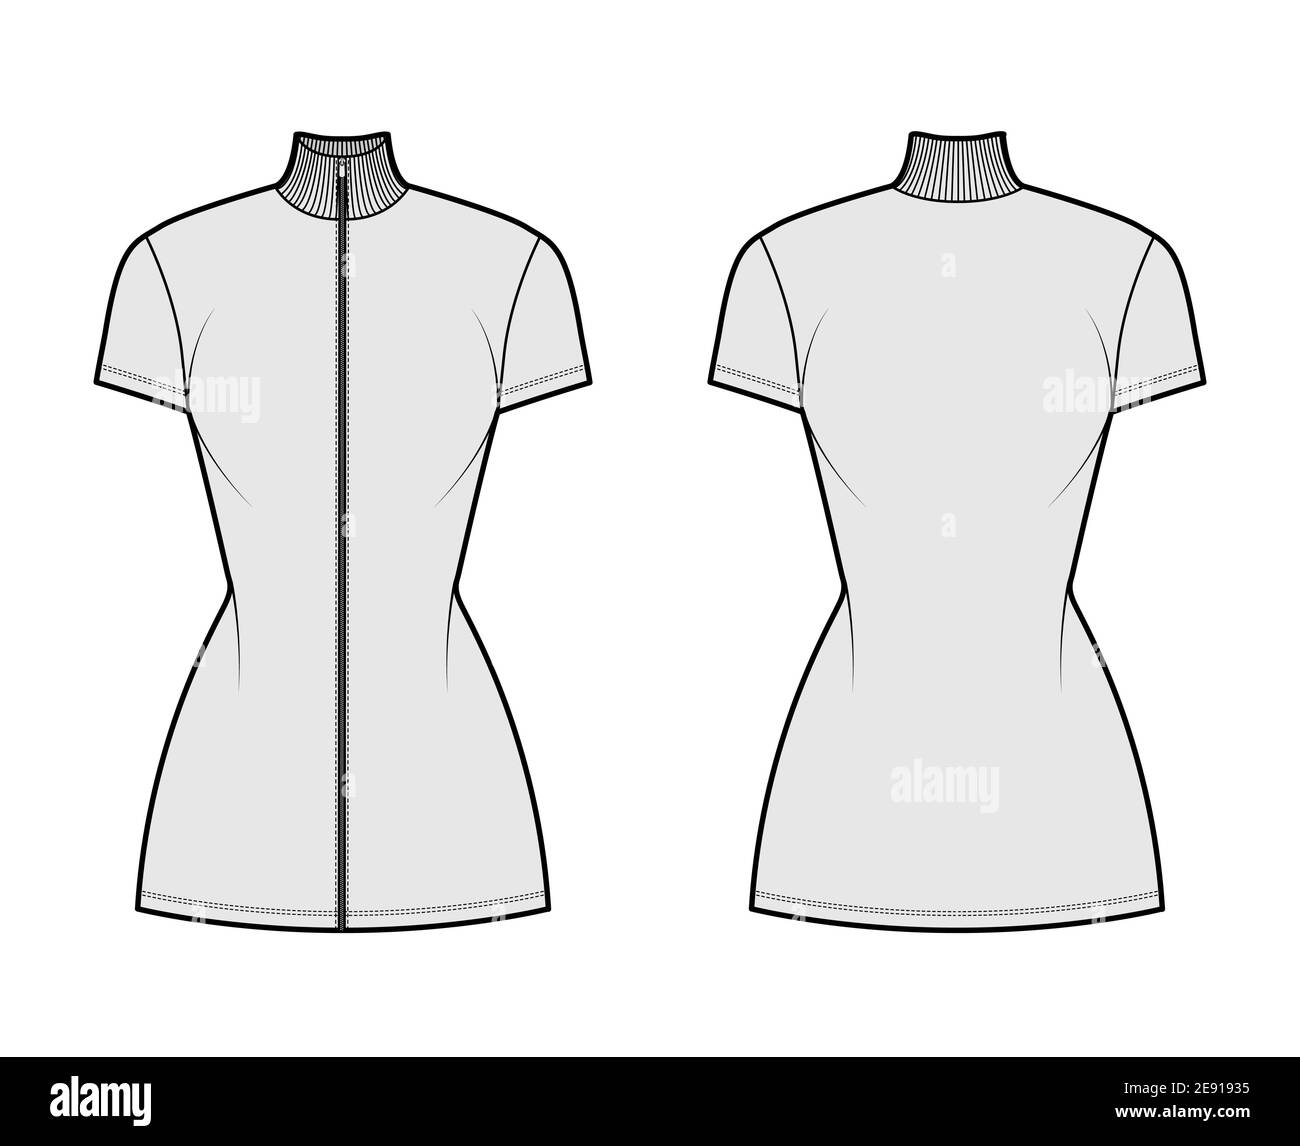 Turtleneck zip-up dress technical fashion illustration with short sleeves, mini length, fitted body, Pencil fullness. Flat apparel template front, back, grey color. Women, men unisex CAD mockup Stock Vector